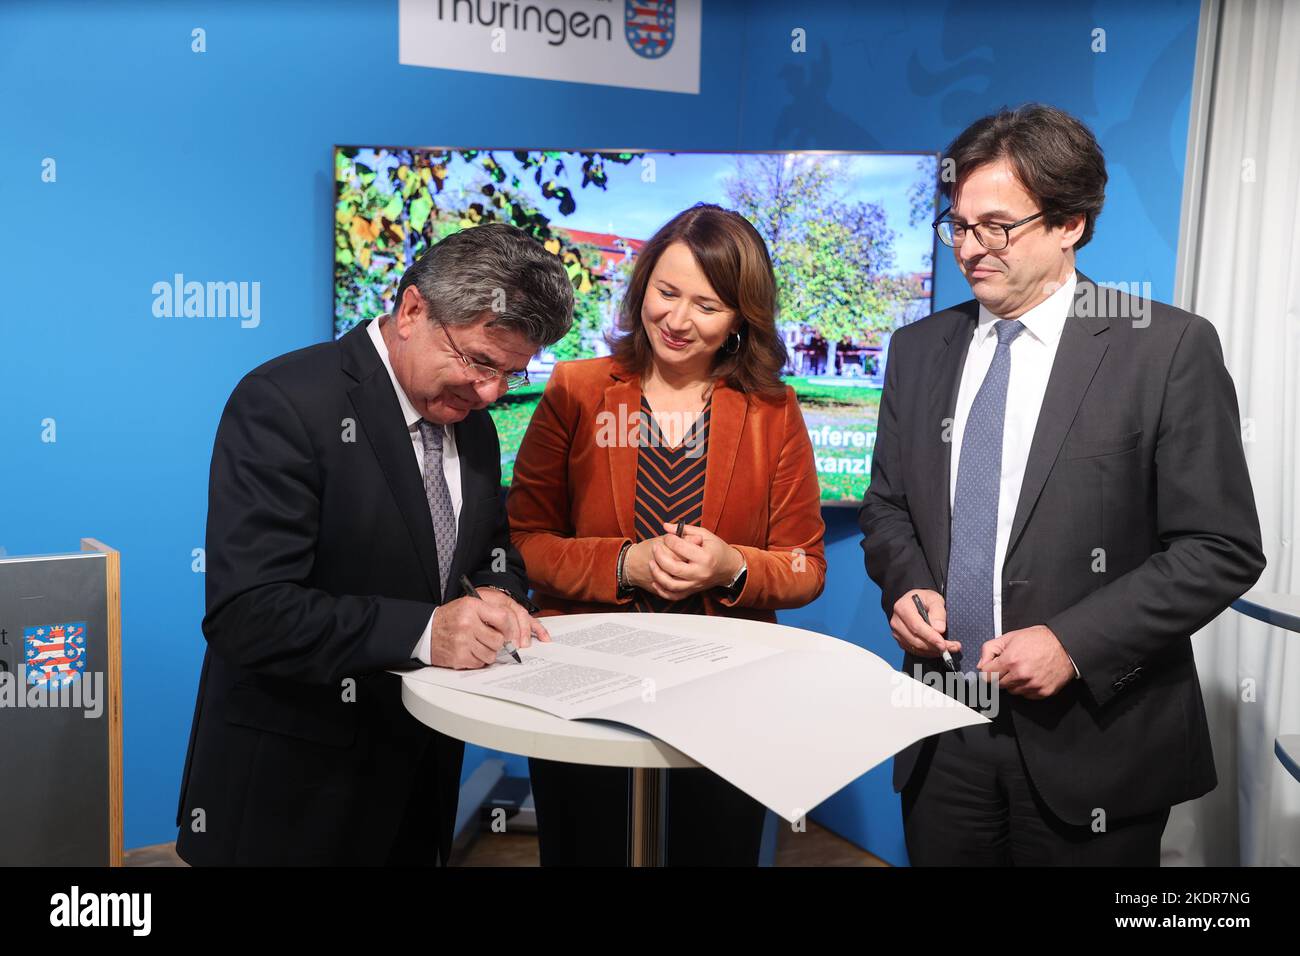 Erfurt, Germany. 08th Nov, 2022. Michael Brychcy, (l-r) President of the Association of Municipalities and Towns of Thuringia, Anja Siegesmund, (Bündnis 90/Die Grünen), Thuringia's Minister for the Environment, Energy and Nature Conservation and Thomas Budde, Managing Director of the Thuringian County Association sign the climate package at a government press conference on the new climate package. Siegesmund will also report on the extension of Thuringia's membership in the regional climate protection network (Under2-Coalition). Credit: Bodo Schackow/dpa/Alamy Live News Stock Photo